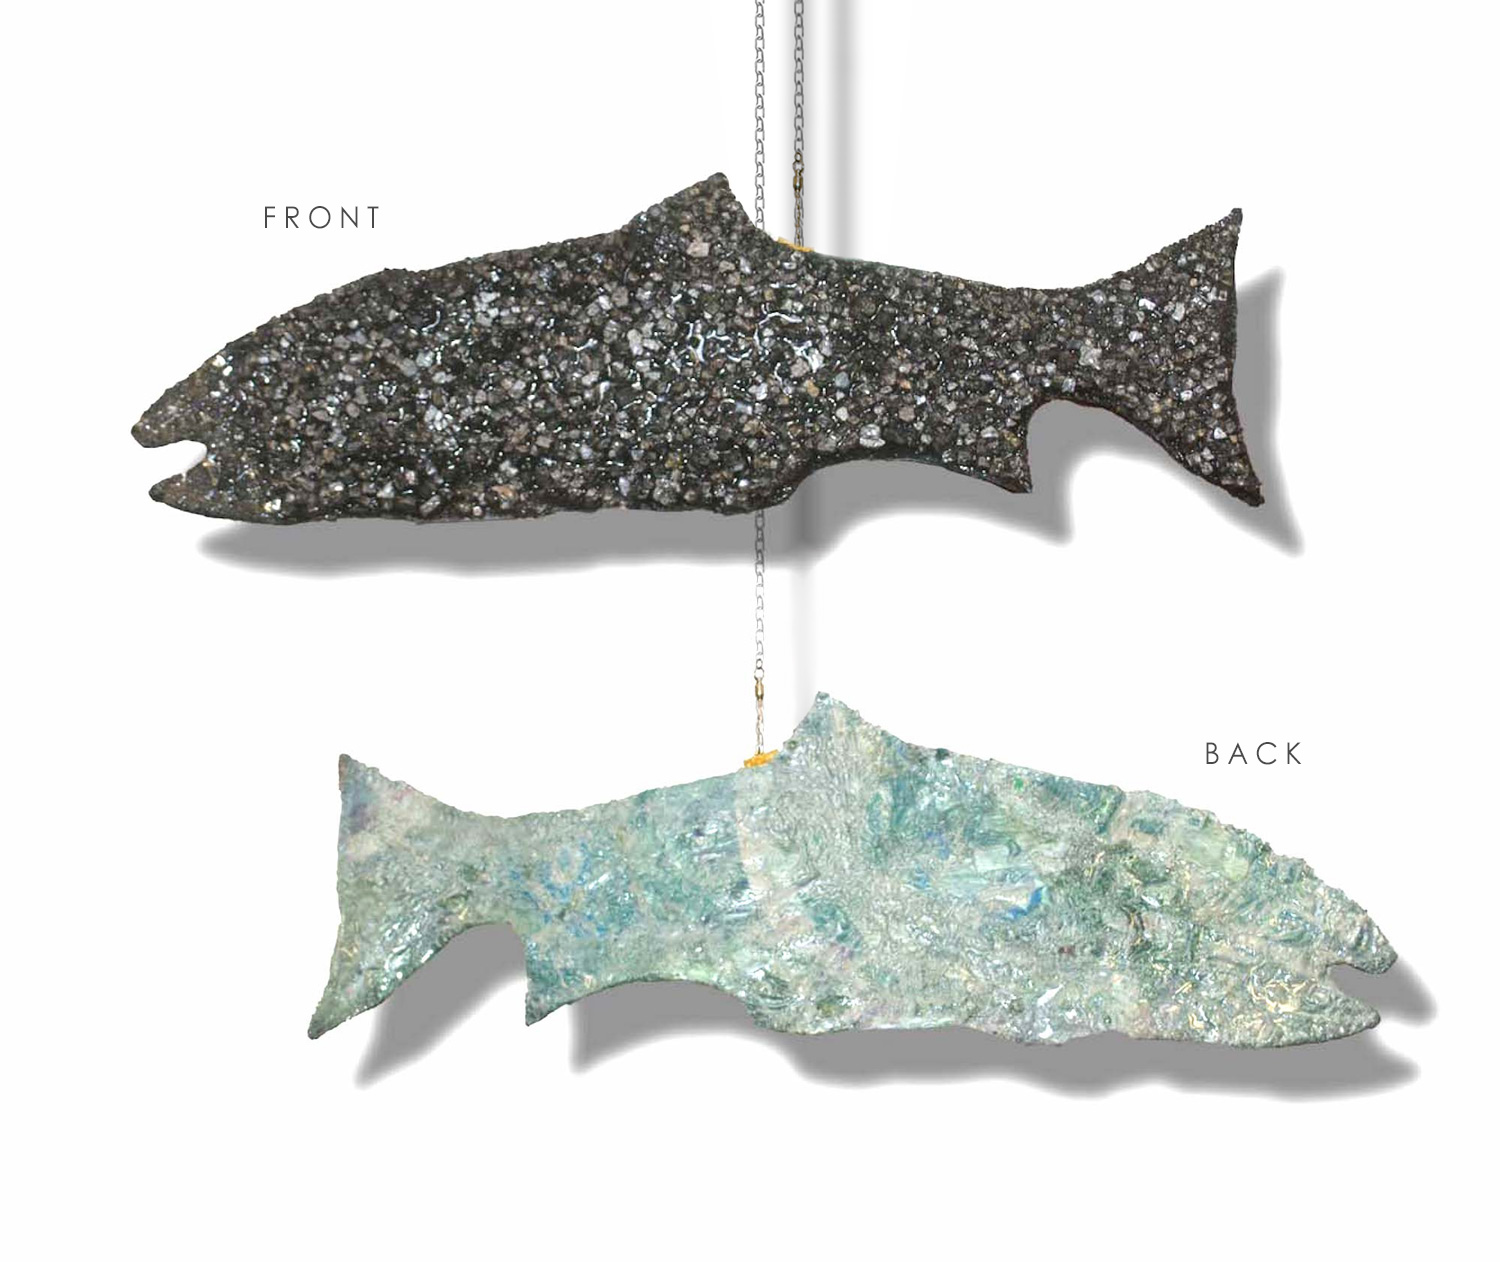 _9--MIca-Fish-front-back-